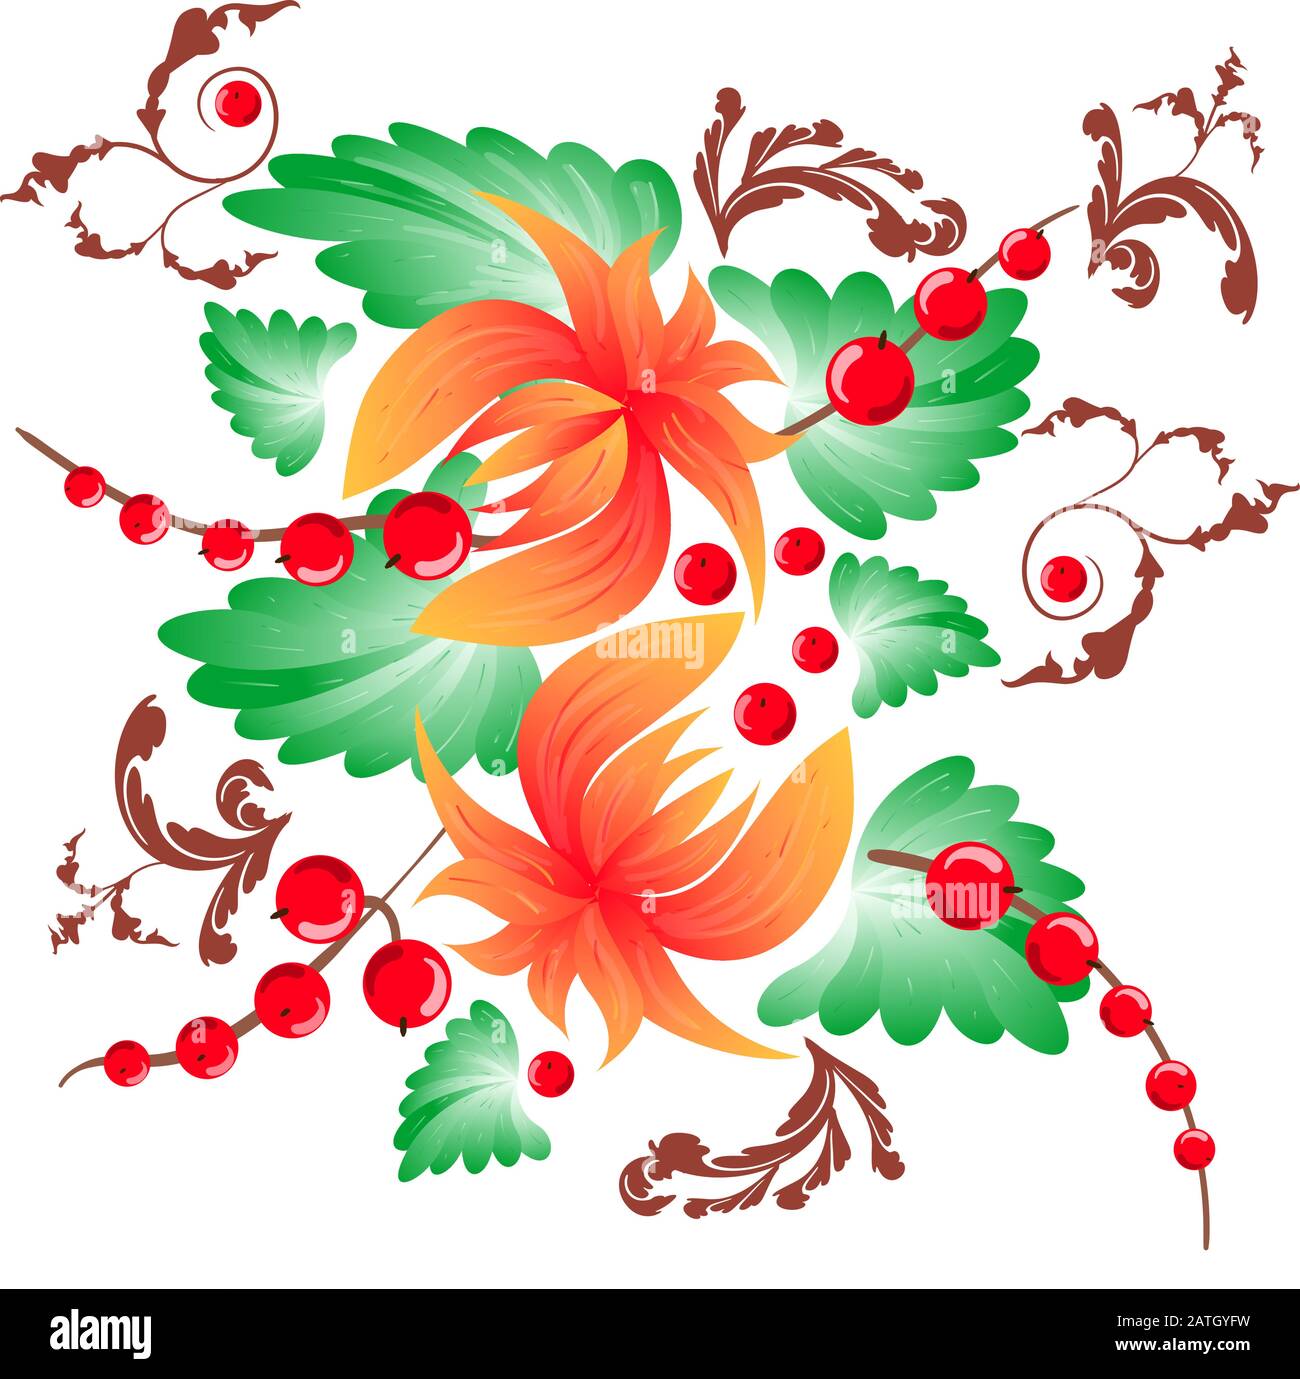 Floral ukrainian vector image. Flower in the style of Petrykivka painting. Isolated element for design Stock Vector